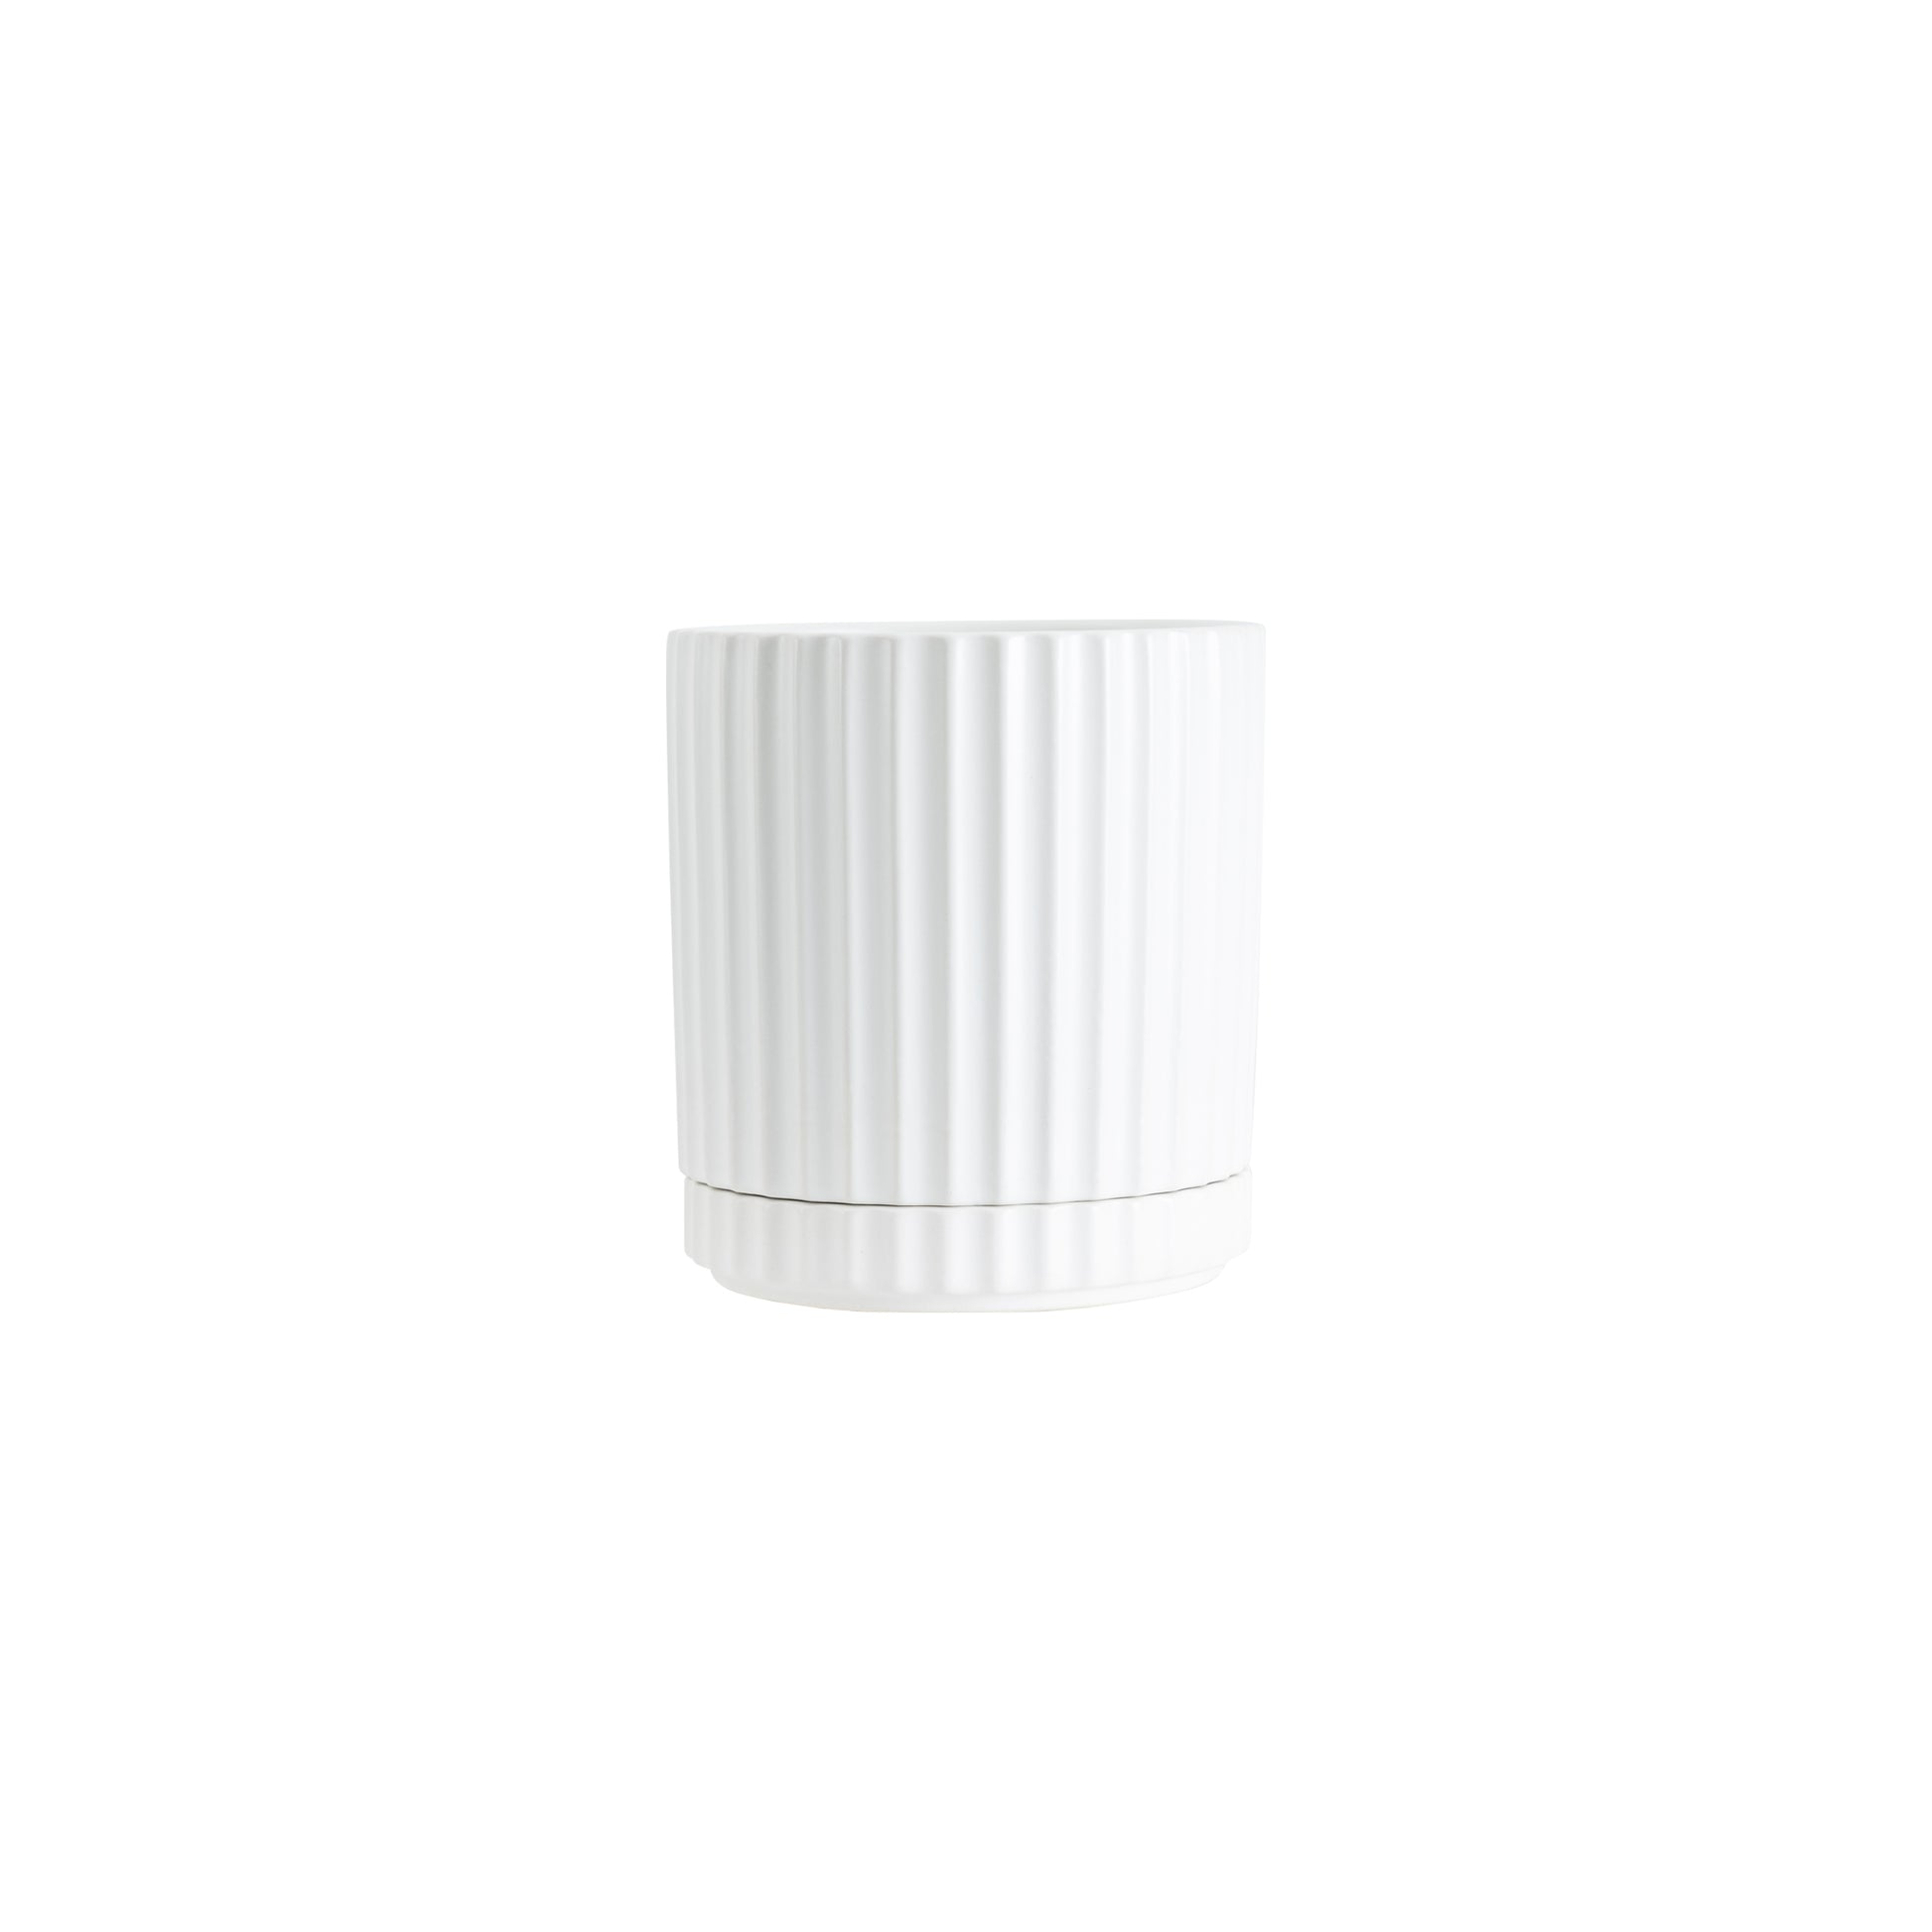 Inspired by the pillars at the Acropolis, the Athens planter in white combines classic style with the functionality of a drainage hole and matching saucer.   Mix and match plant pots to add personality and greenery to any space.  Colour: white  Dimensions: 13cm internal diameter x 16cm high